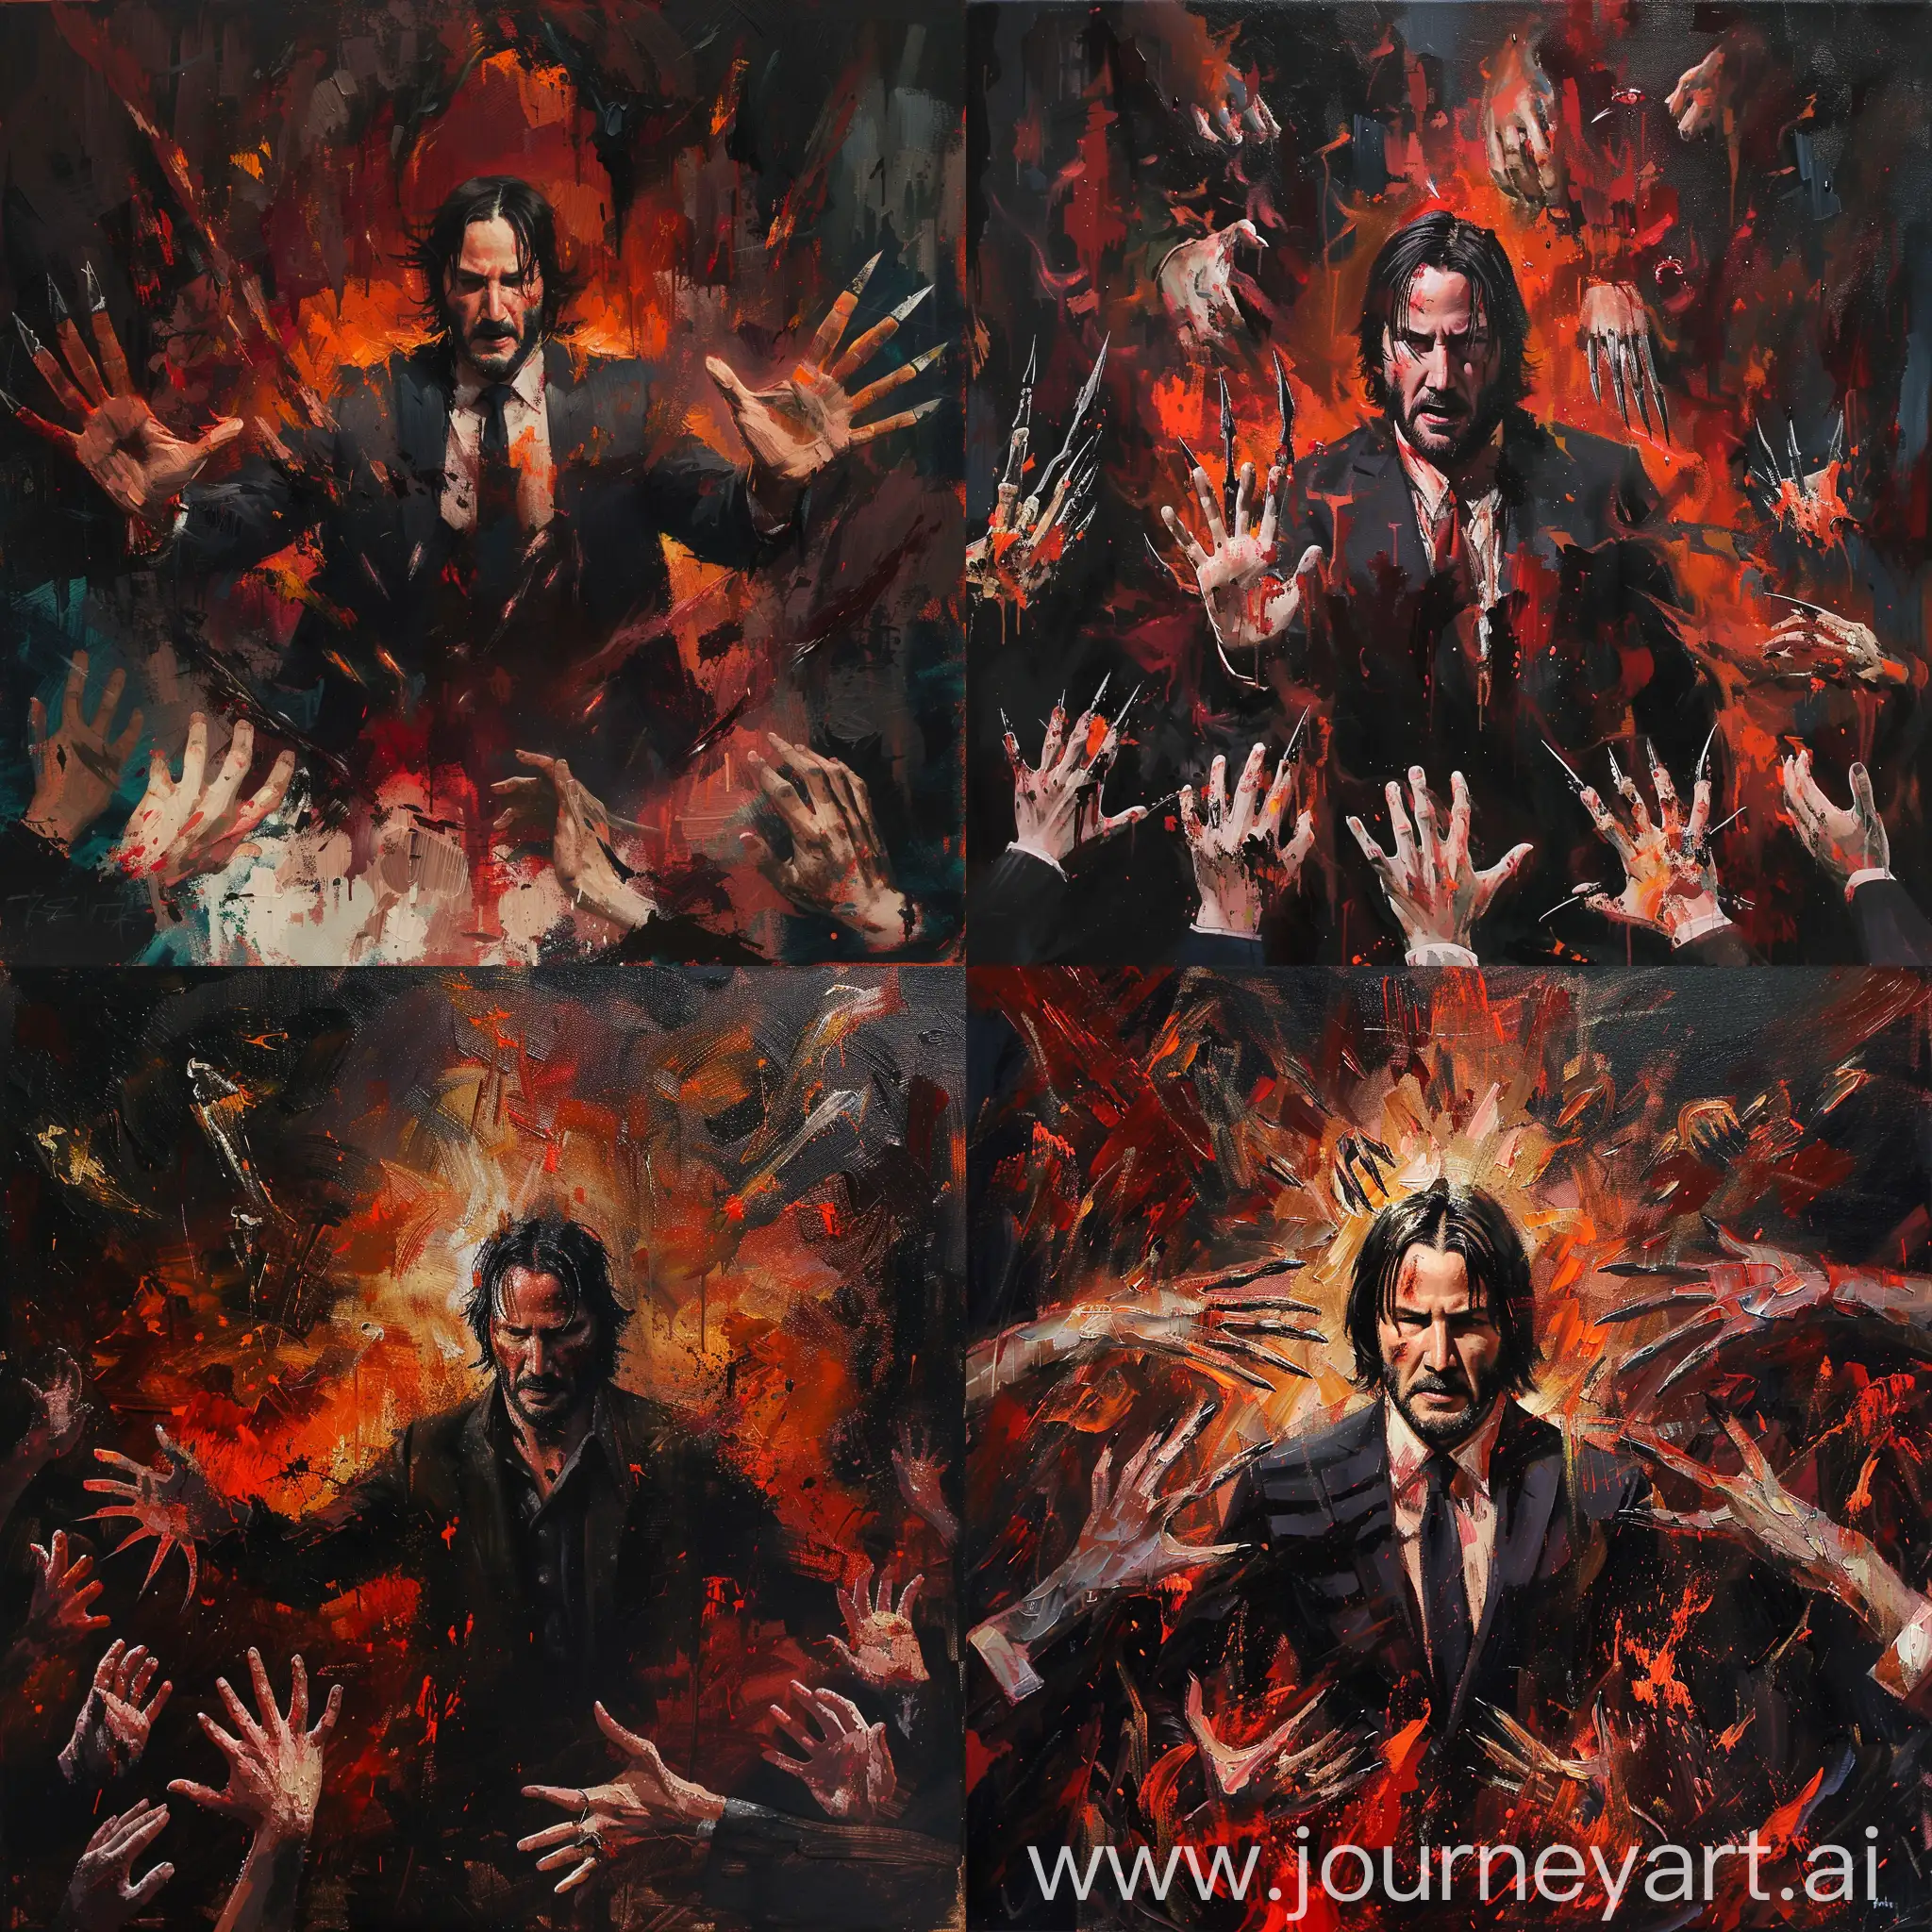 oil painting draw inspiration from the intense and dramatic elements of the original artwork. Focus on depicting a central figure which is john wick in a moment of struggle or conflict, surrounded by menacing and chaotic elements that convey a sense of danger and turmoil.

Use a palette of fiery reds, oranges, and dark shadows to create a vivid and intense atmosphere. Incorporate claw-like hands and elongated fingers reaching towards the central figure, symbolizing a threatening force or inner turmoil. The background should be dark and tumultuous, with abstract shapes hinting at a sense of unease and mystery.

Emphasize expressive brushwork with visible strokes to add movement and dynamism to the composition. Consider incorporating elements that suggest a journey or transition, such as symbolic motifs or subtle details that hint at a narrative of transformation or growth.

By combining these elements with a focus on color, composition, and emotion, create a compelling artwork that captures the essence filled with challenges and inner conflicts.